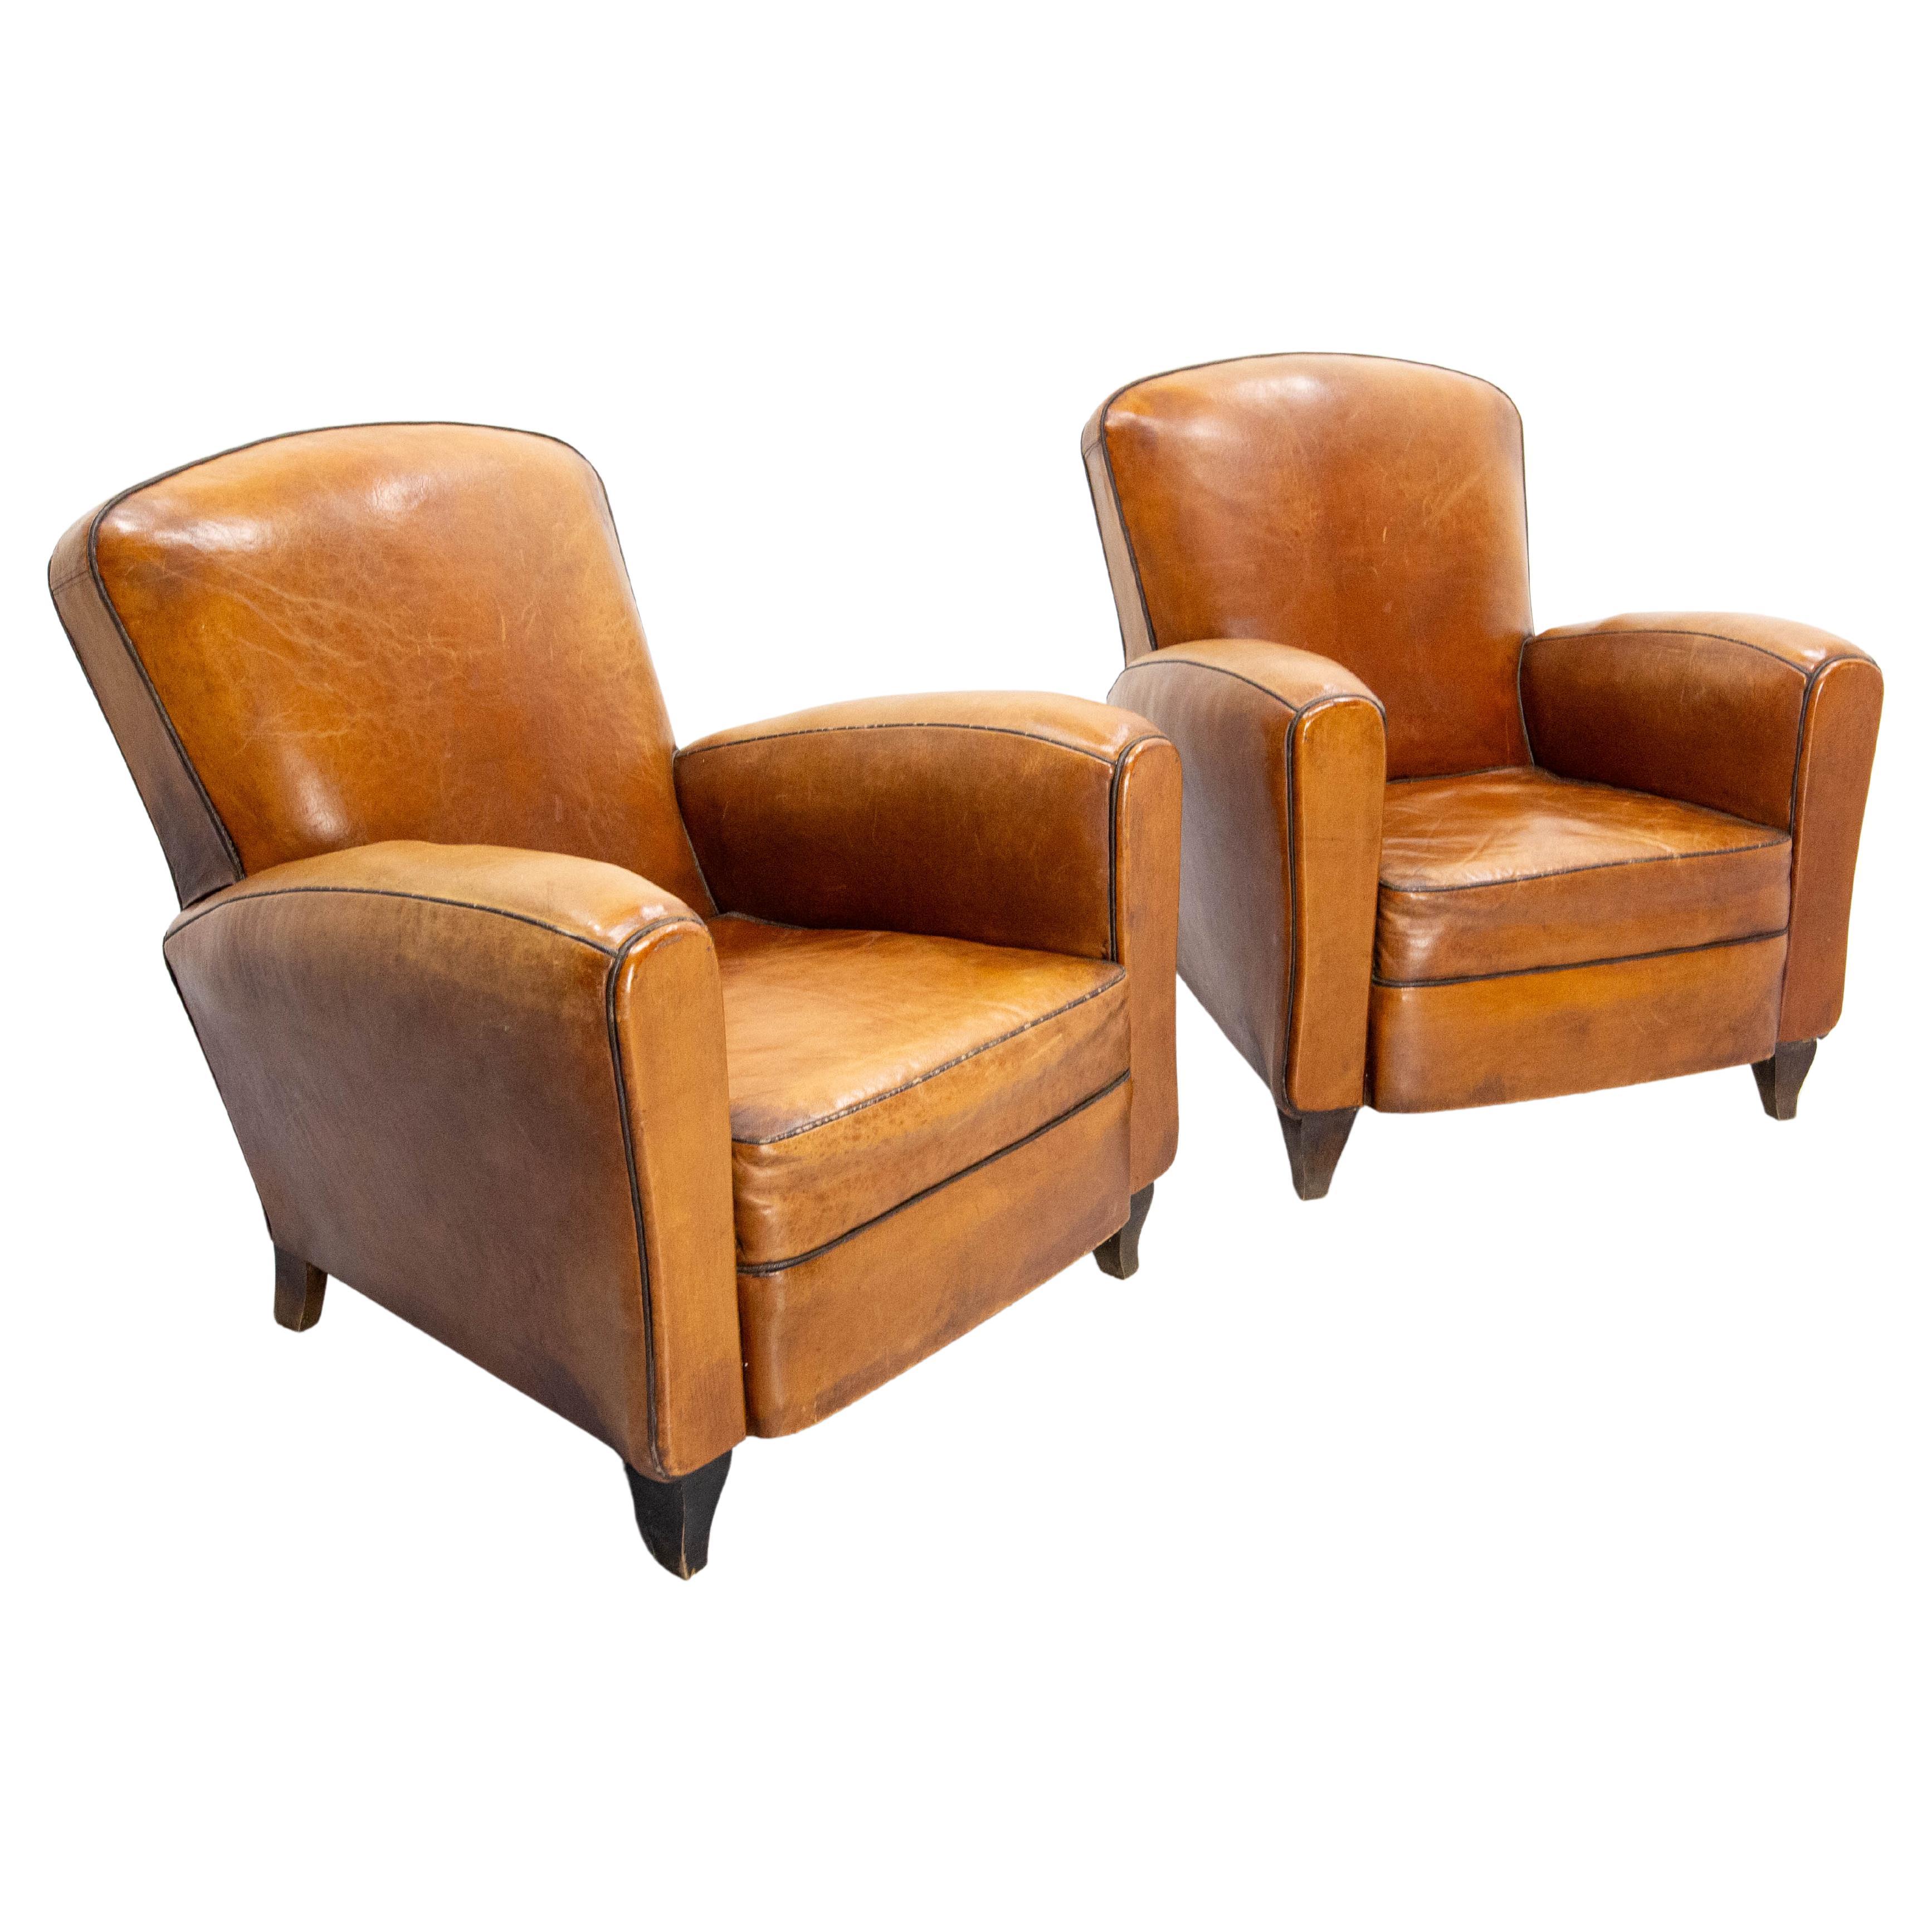 Antique Pair Club Armchair Fauteuil Cognac Leather & Studs French, circa 1940